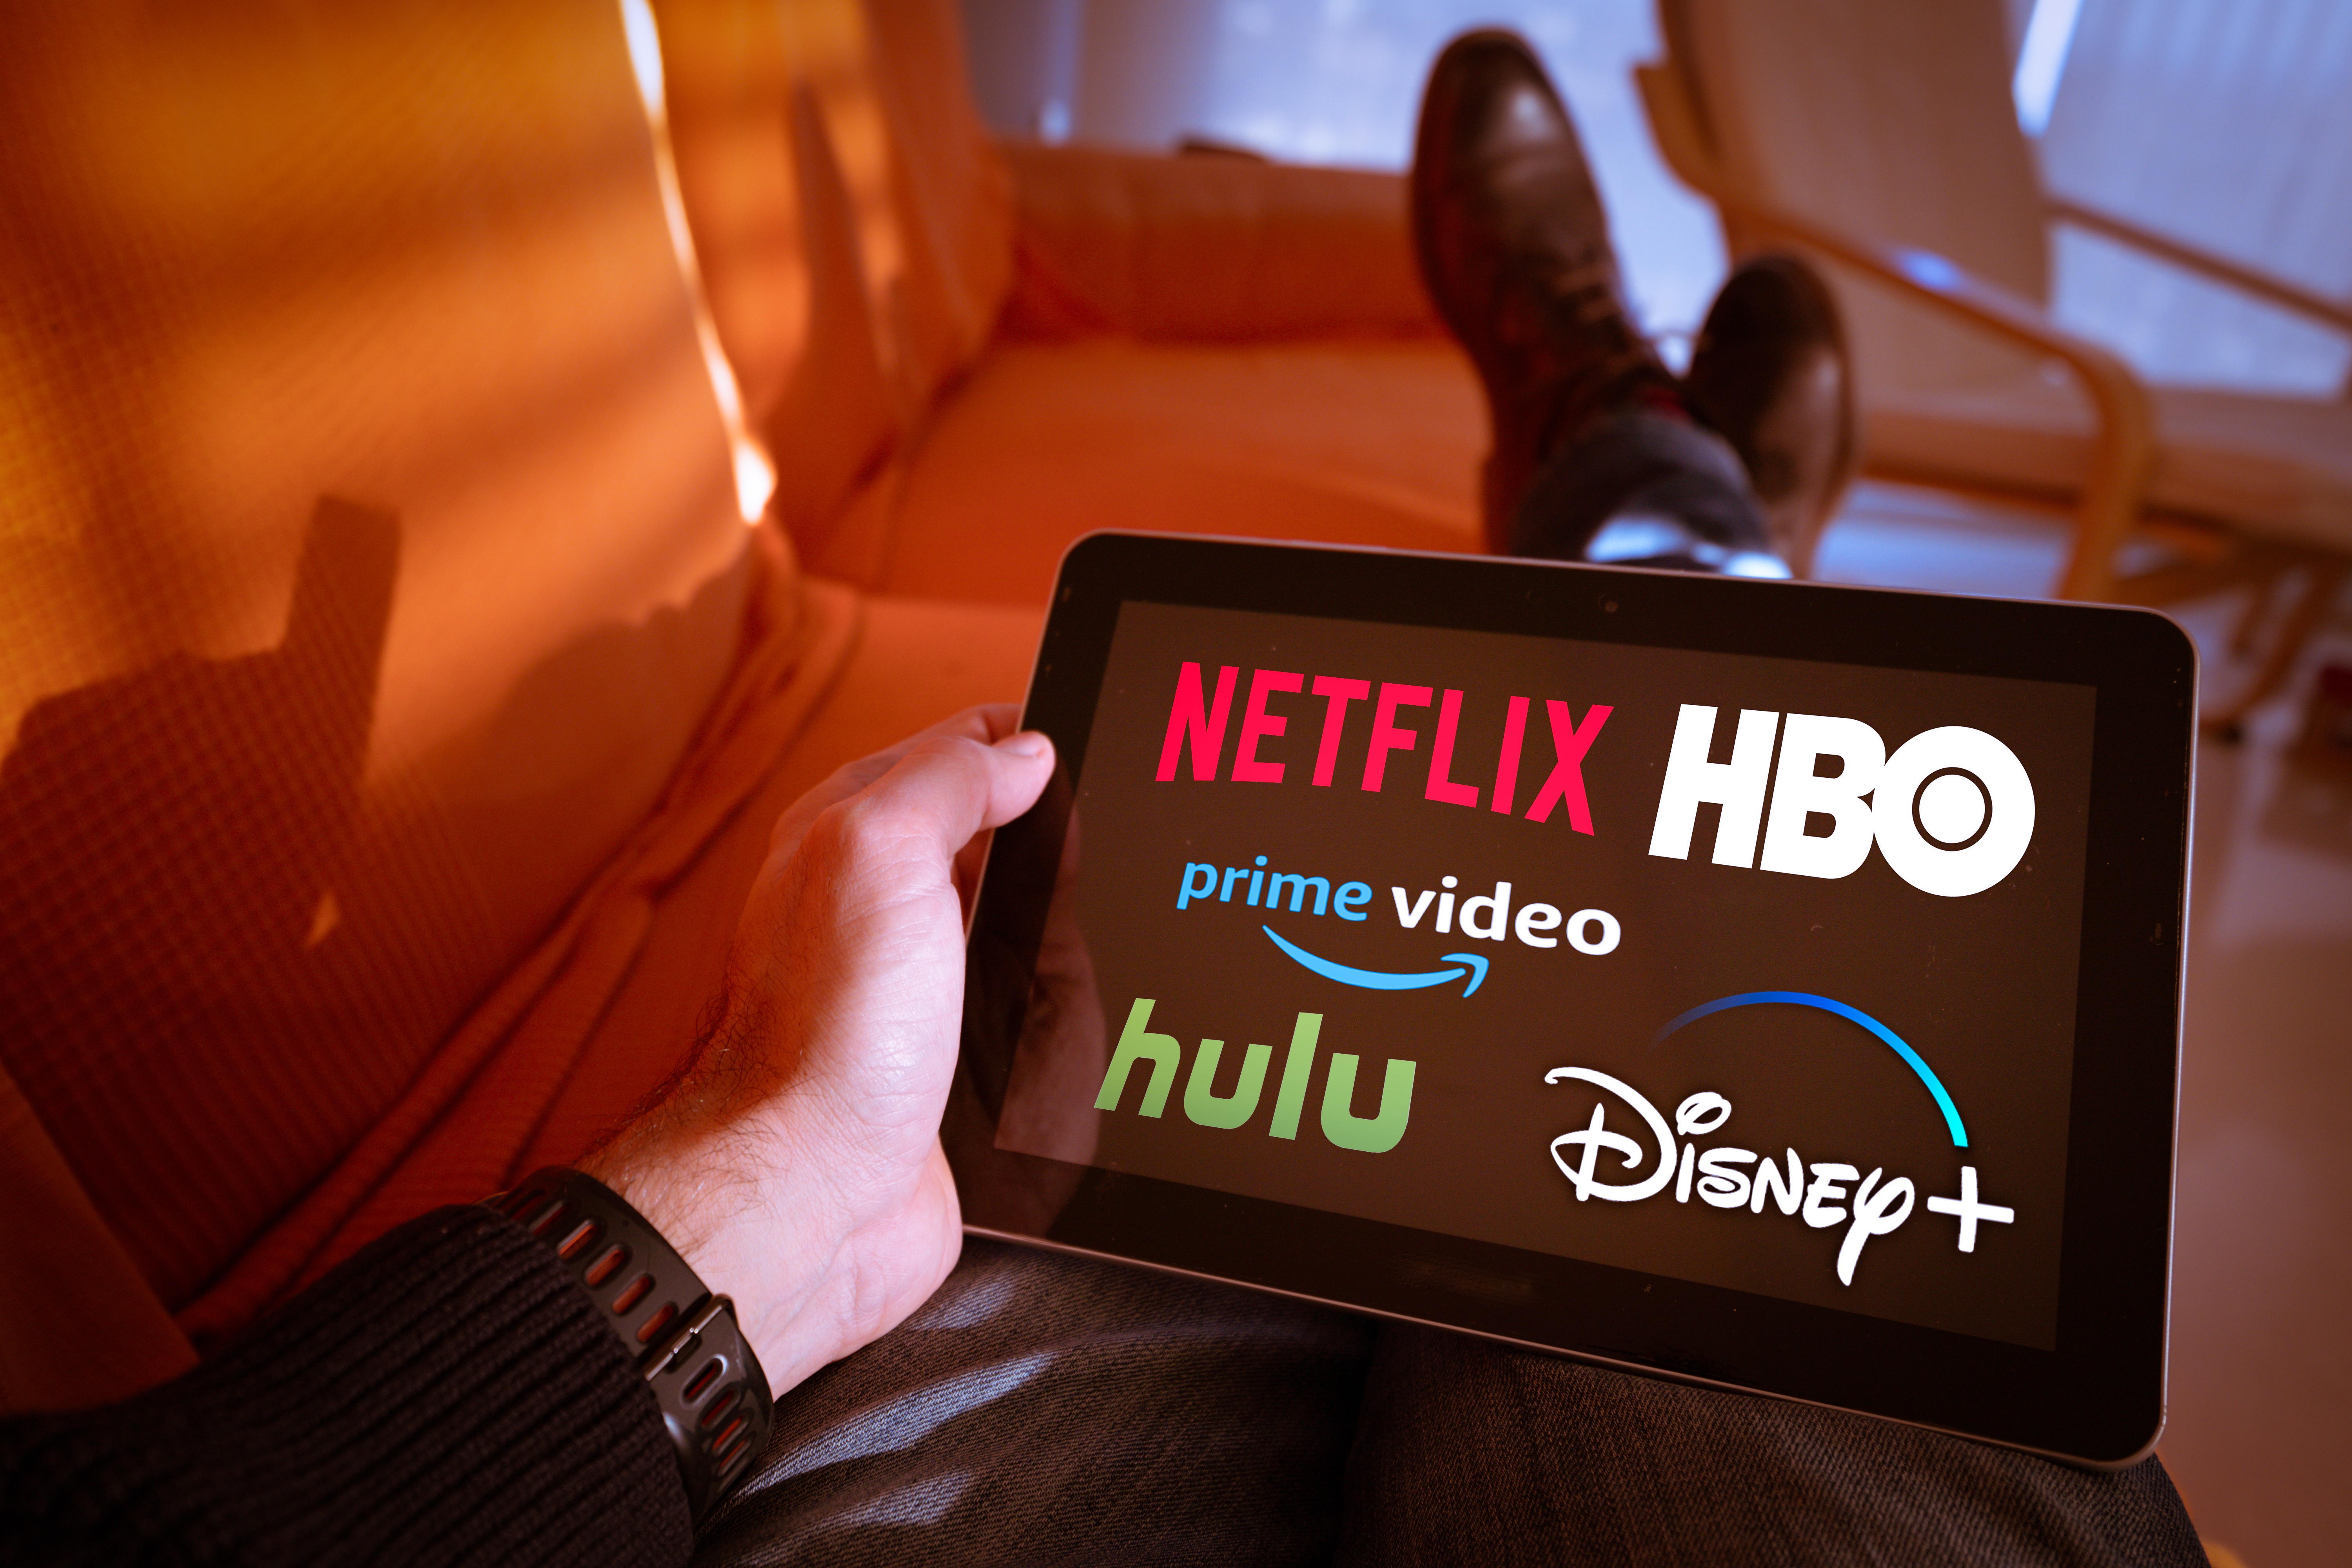 Hub: Consumers Seem to be Most Familiar With Streaming Services That Offer Genre-Focused Content